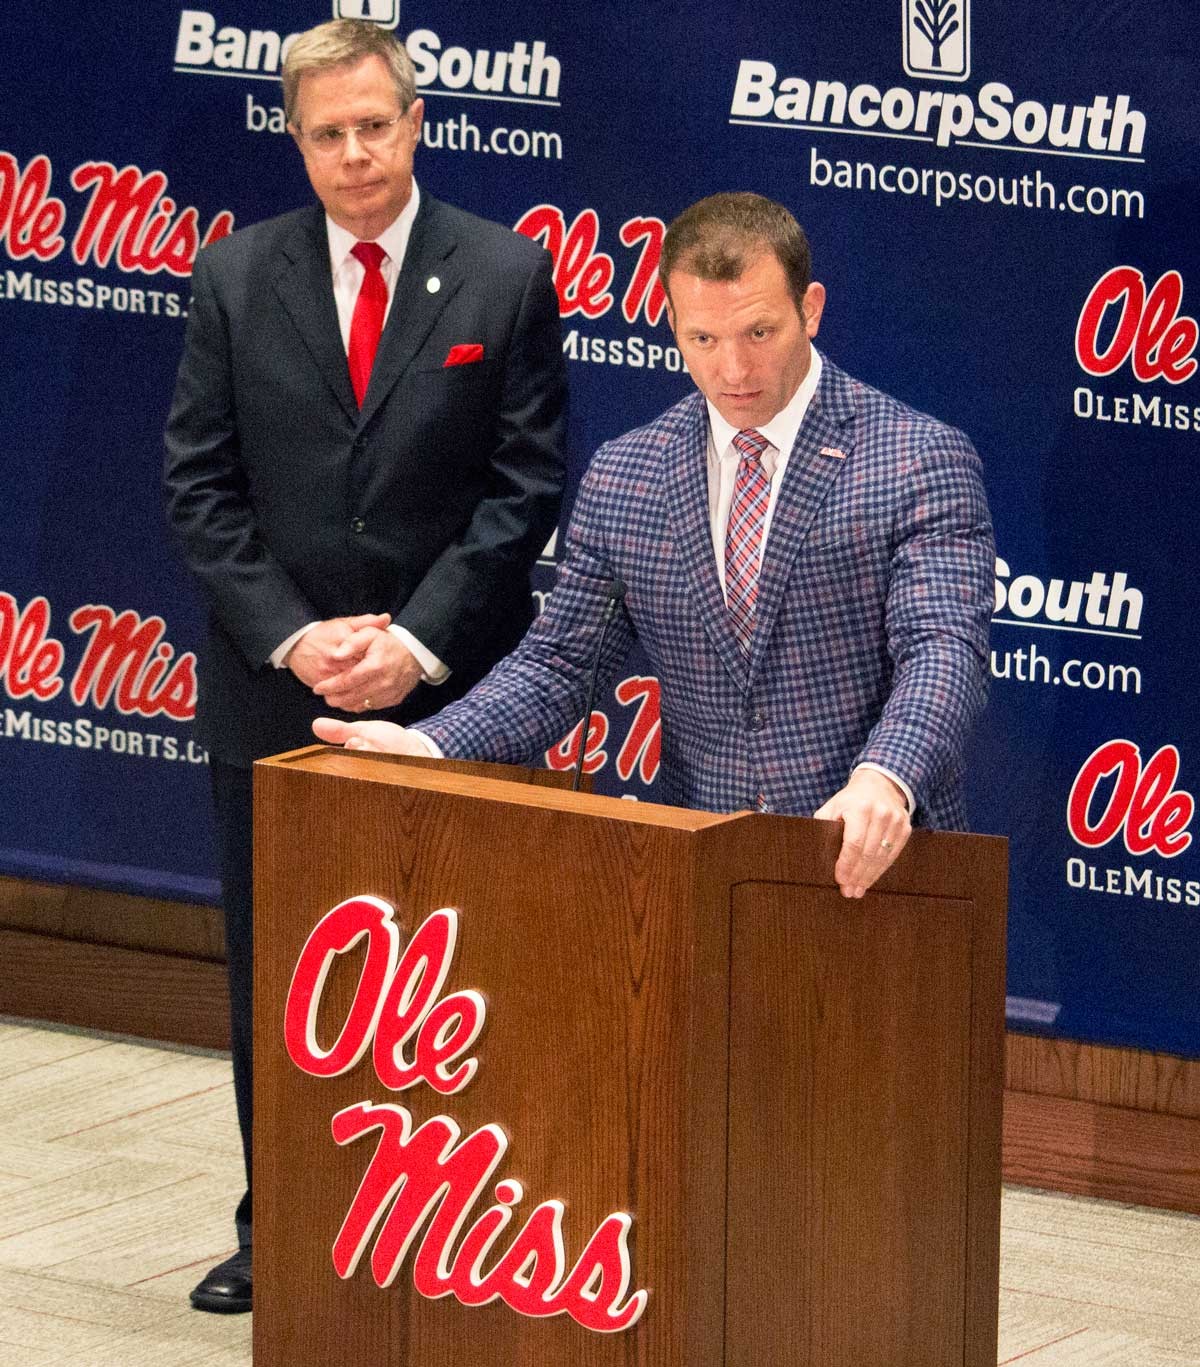 Vitter’s legacy as Chancellor will be affected by Ole Miss’ NCAA case